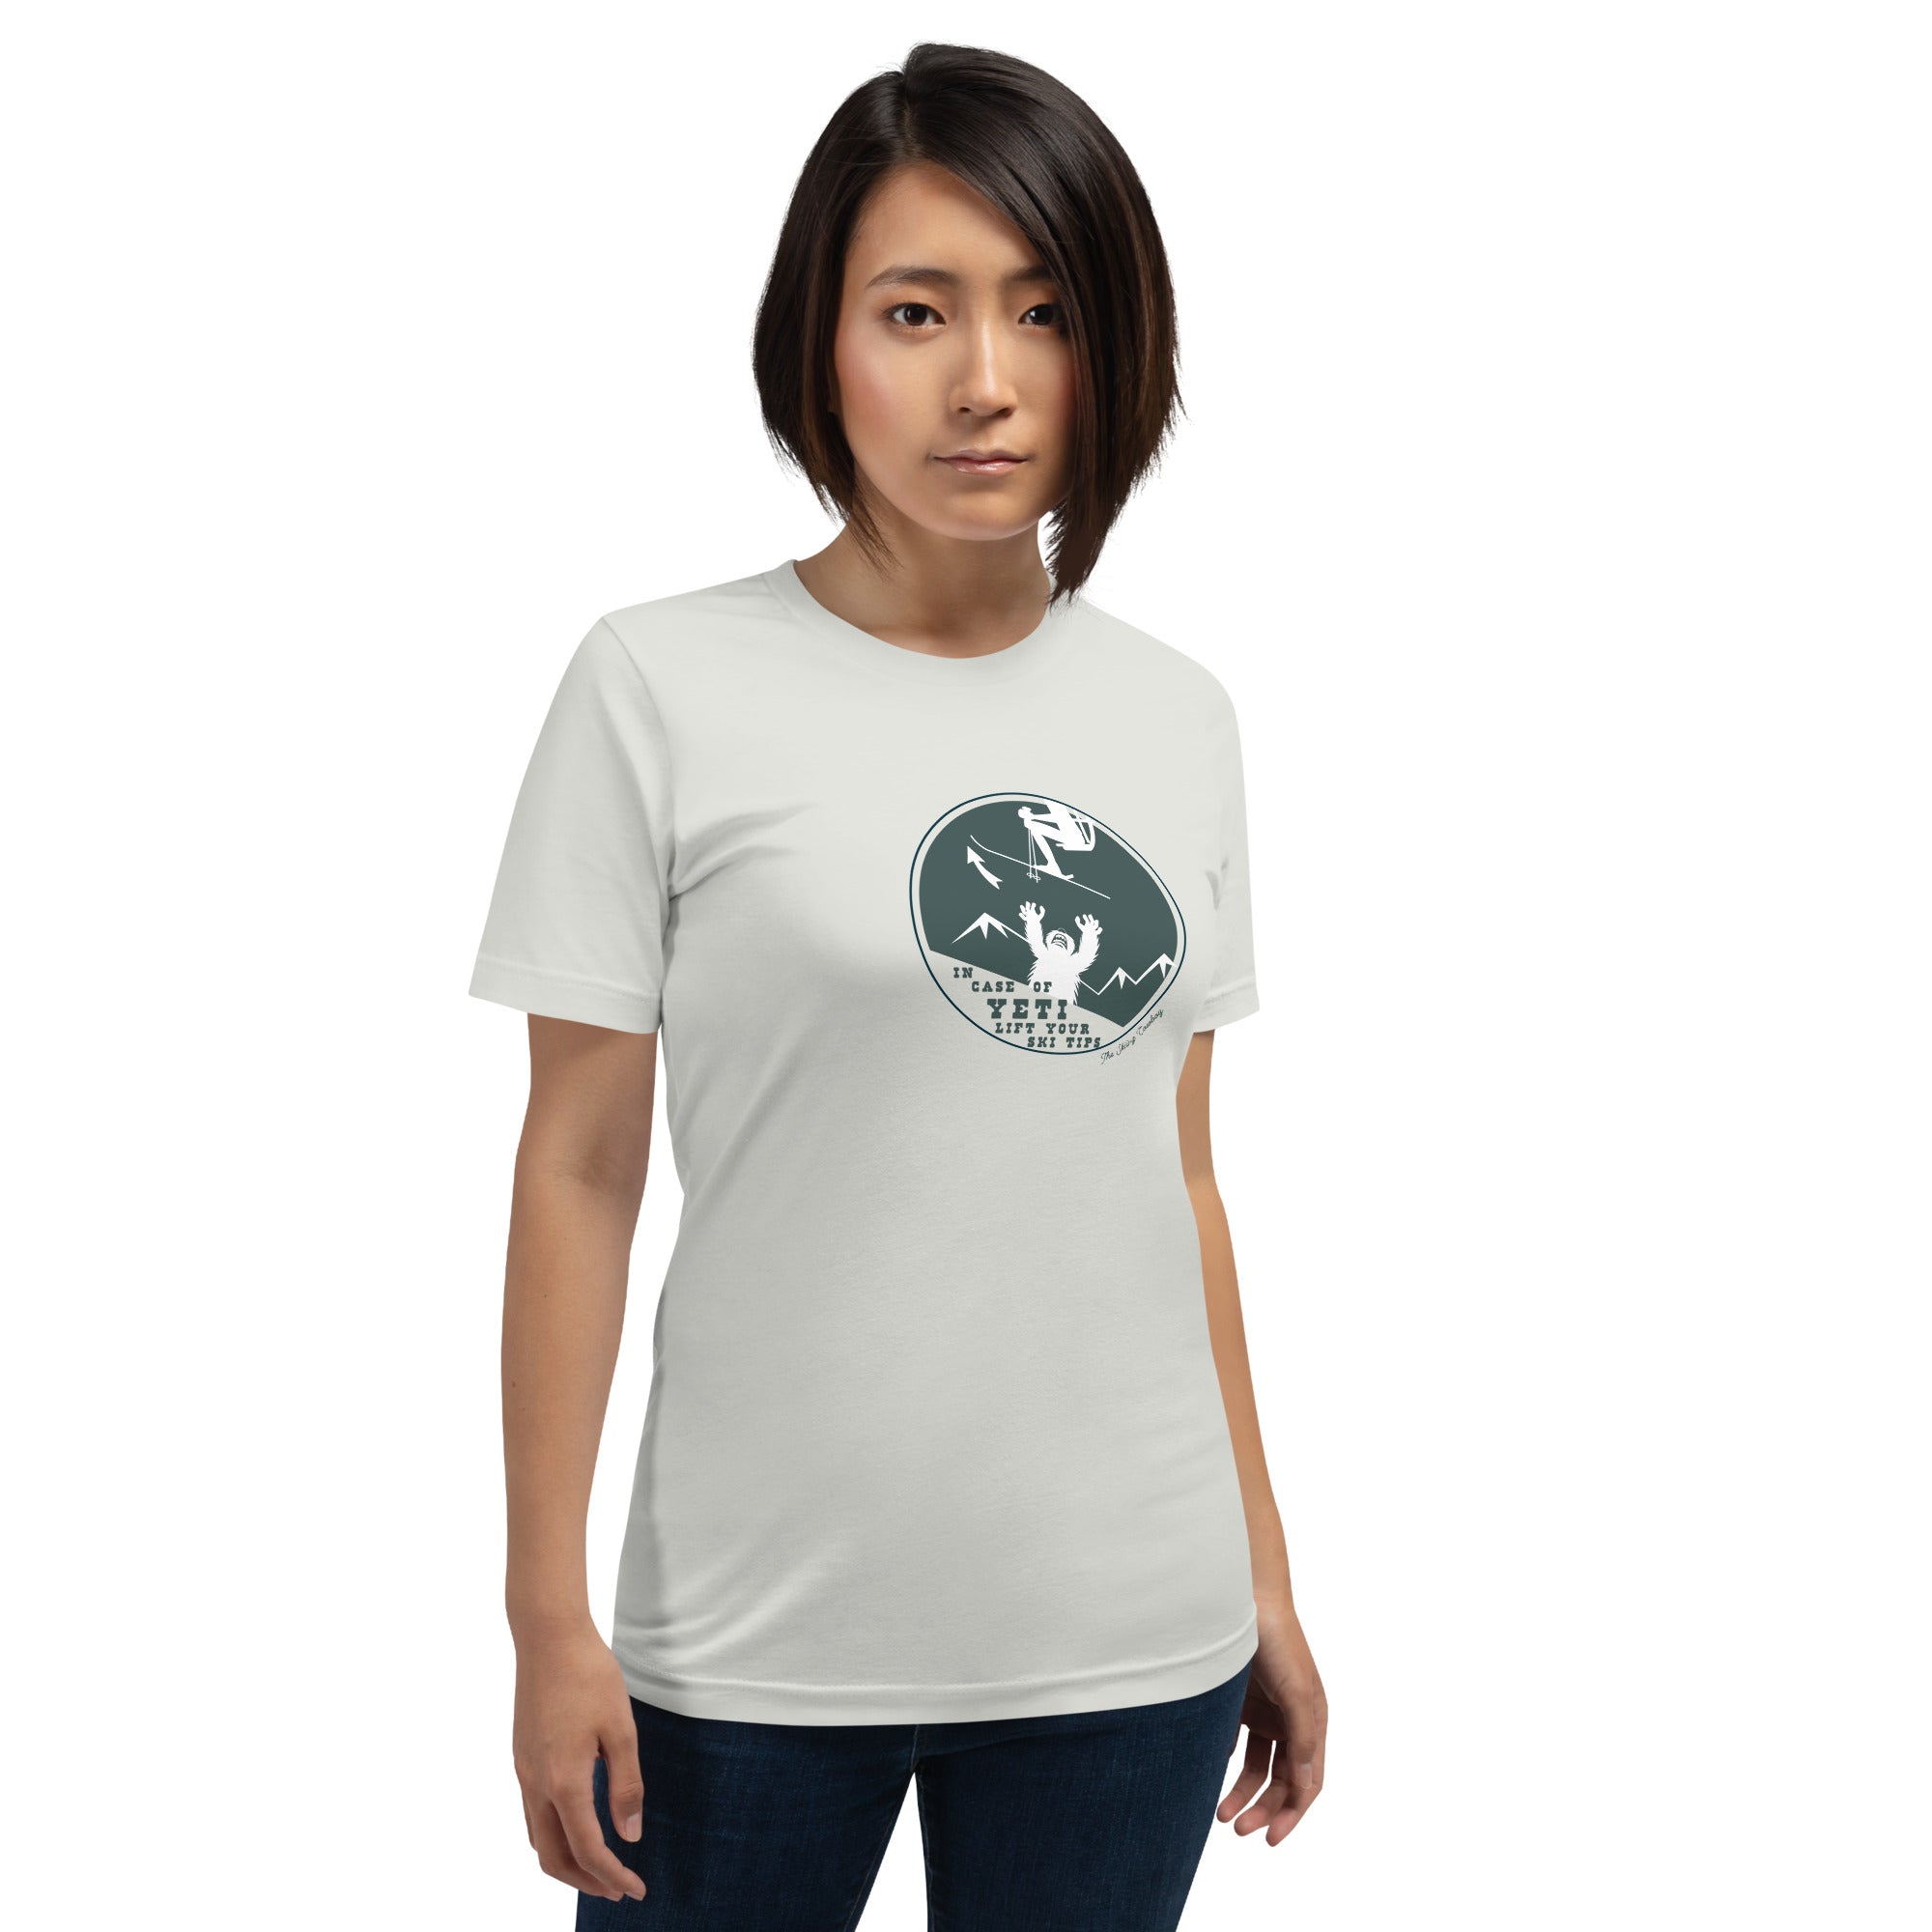 Unisex cotton t-shirt In case of Yeti, lift your ski tips on light colors